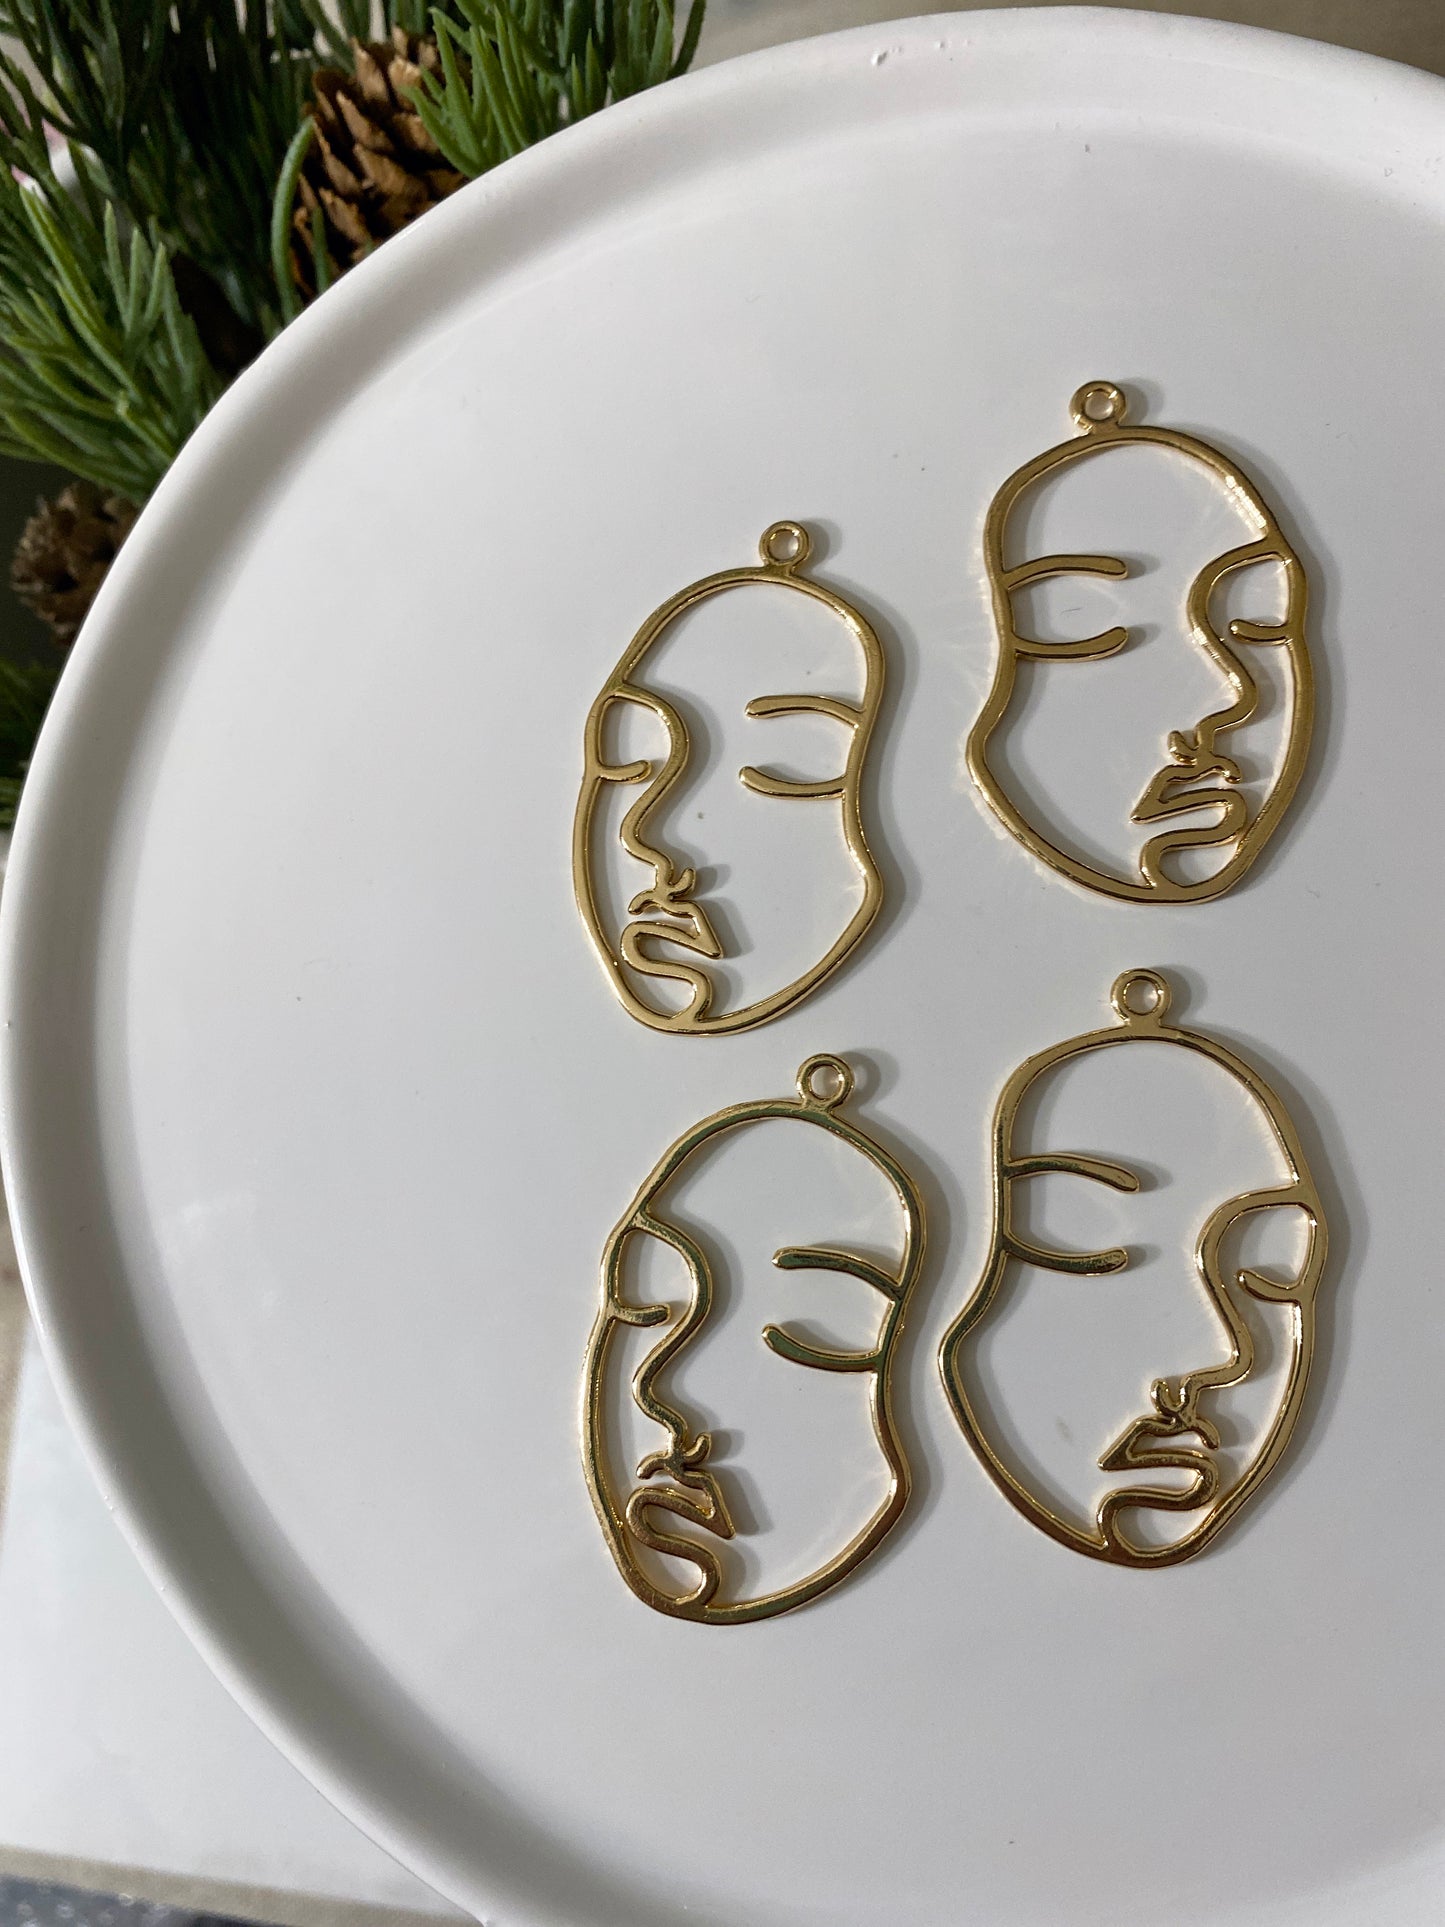 Abstract Face (4 PC) - Gold Tone - Jewelry Findings